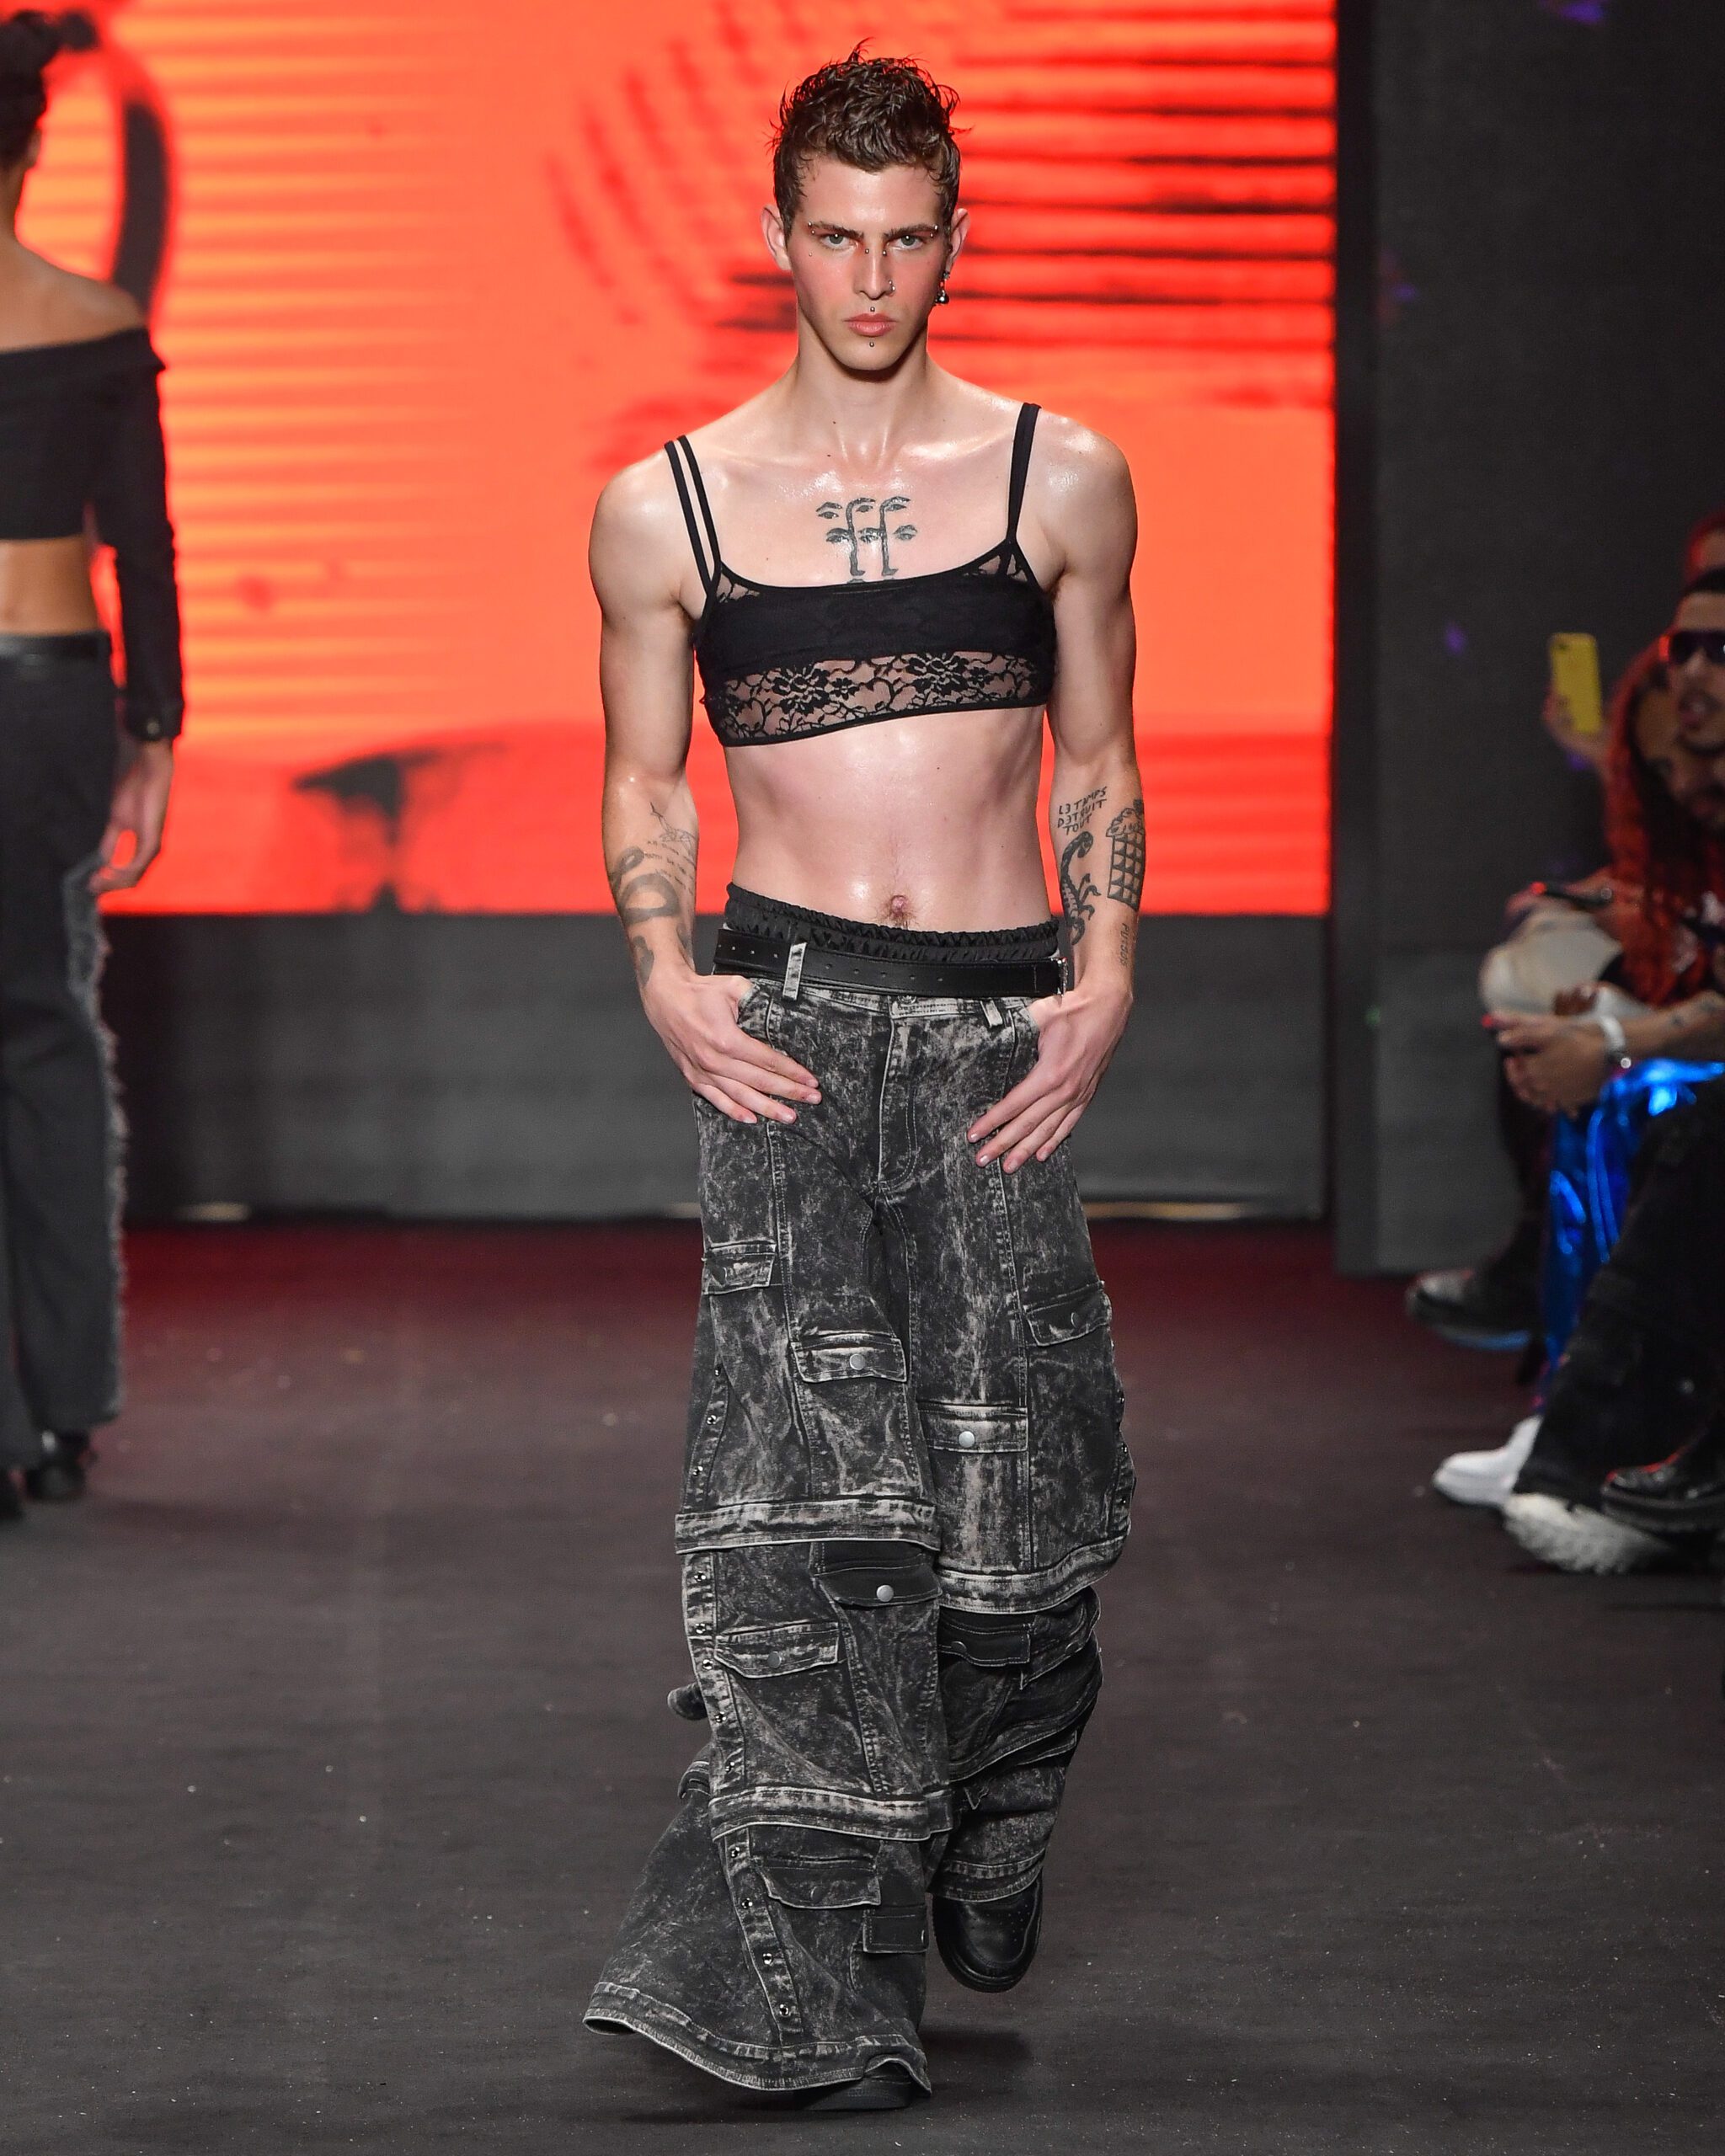 Another Place

SPFW N54

Ze Takahashi / @agfotosite